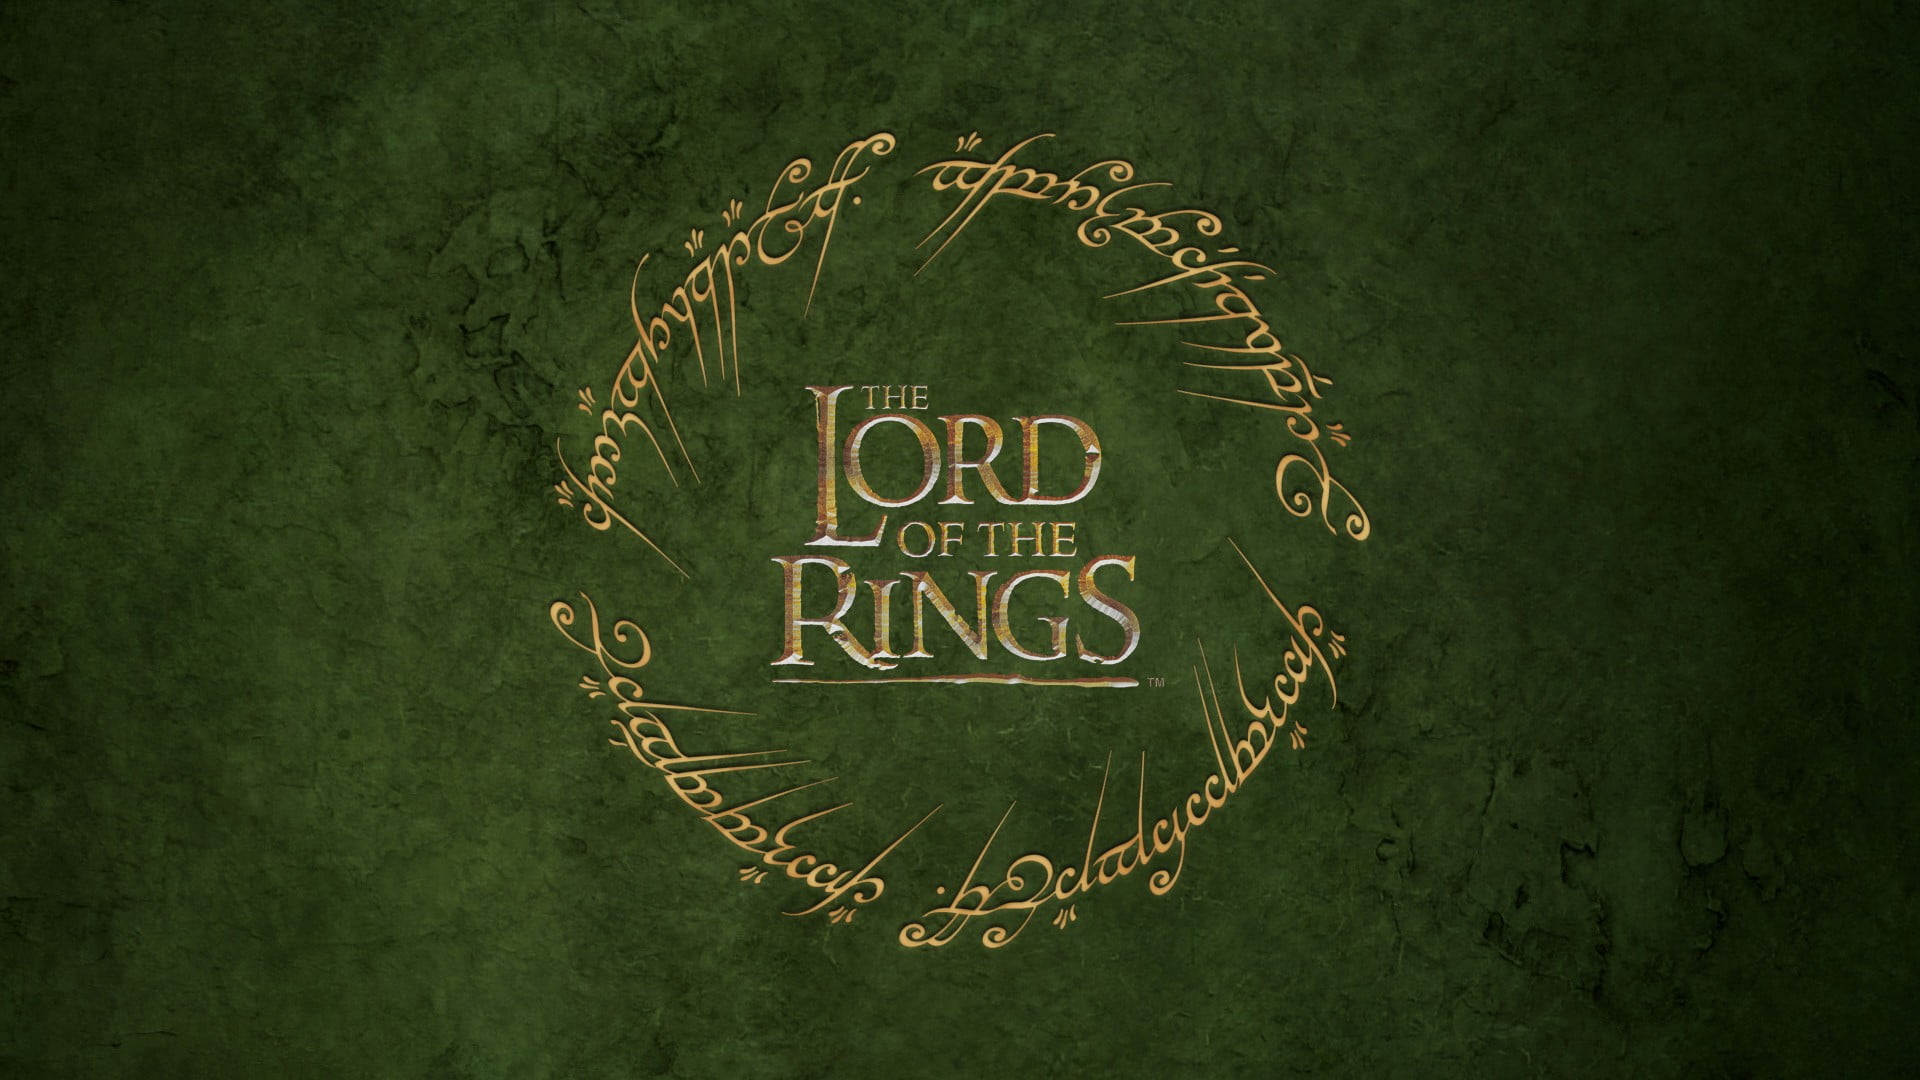 6 The Lord of the Rings & The Hobbit Movies Ranked - YouTube